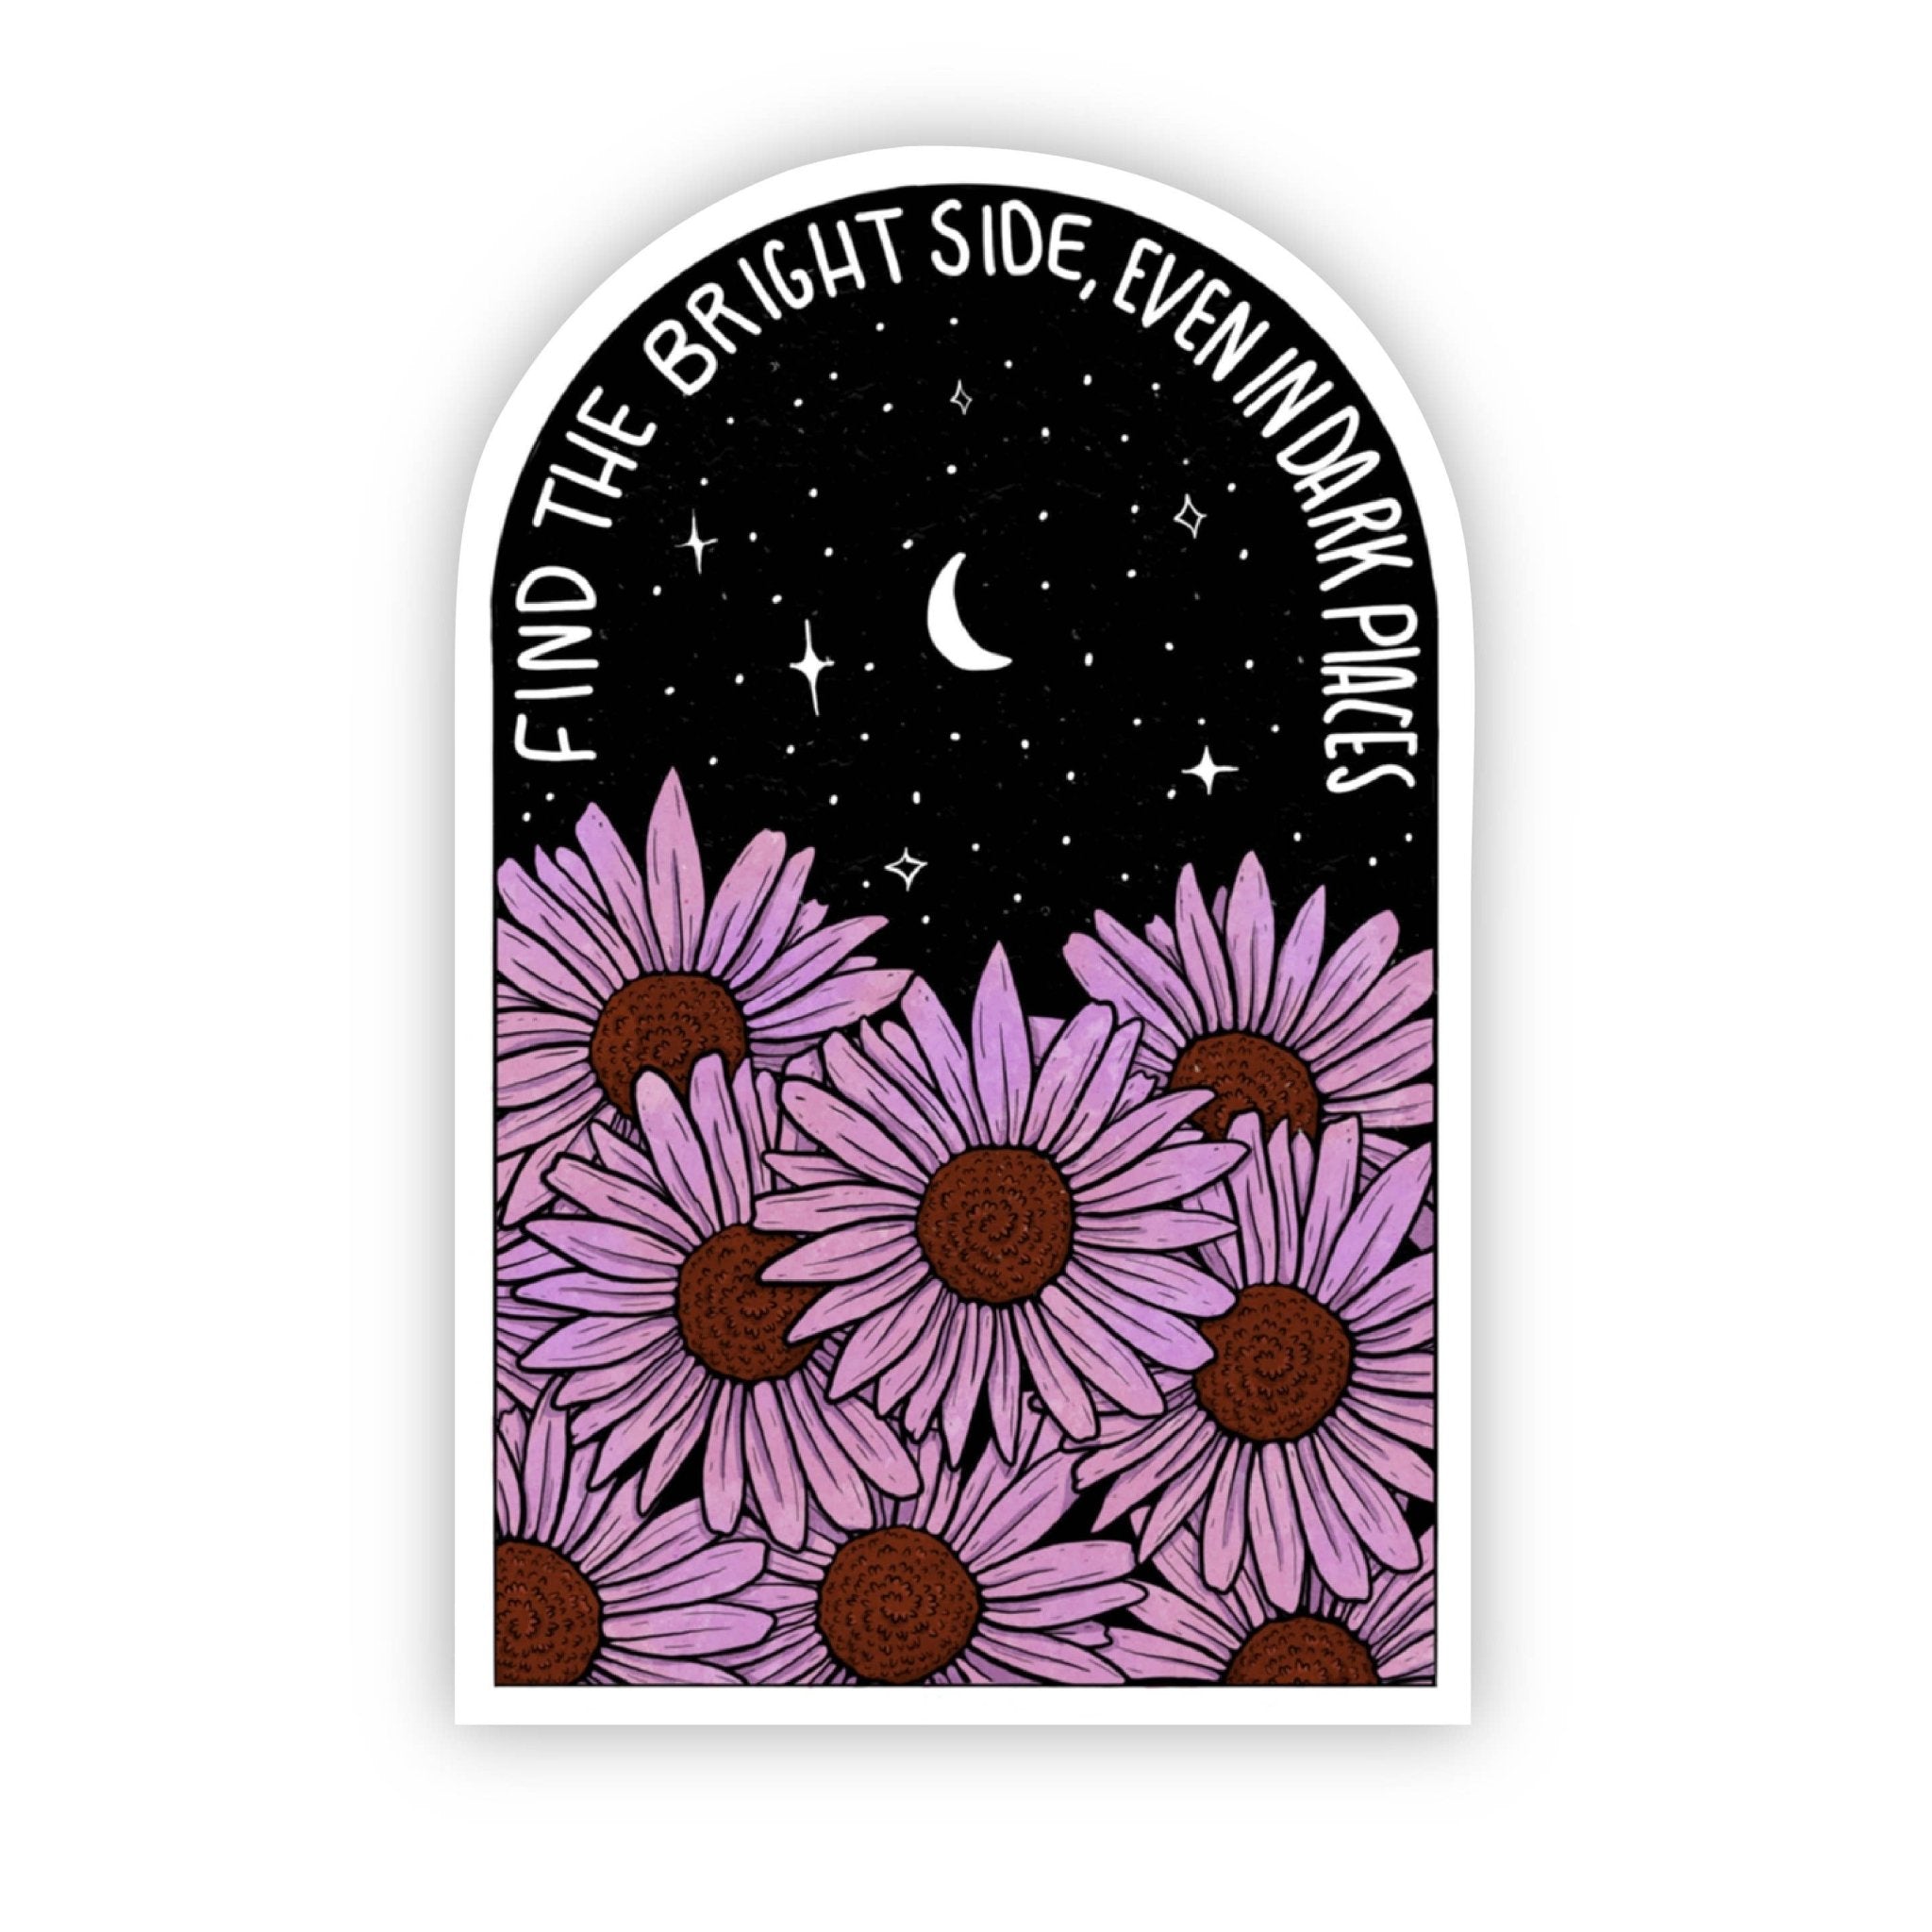 Find The Bright Side, Even In Dark Places | Sticker Floral - Spiral Circle